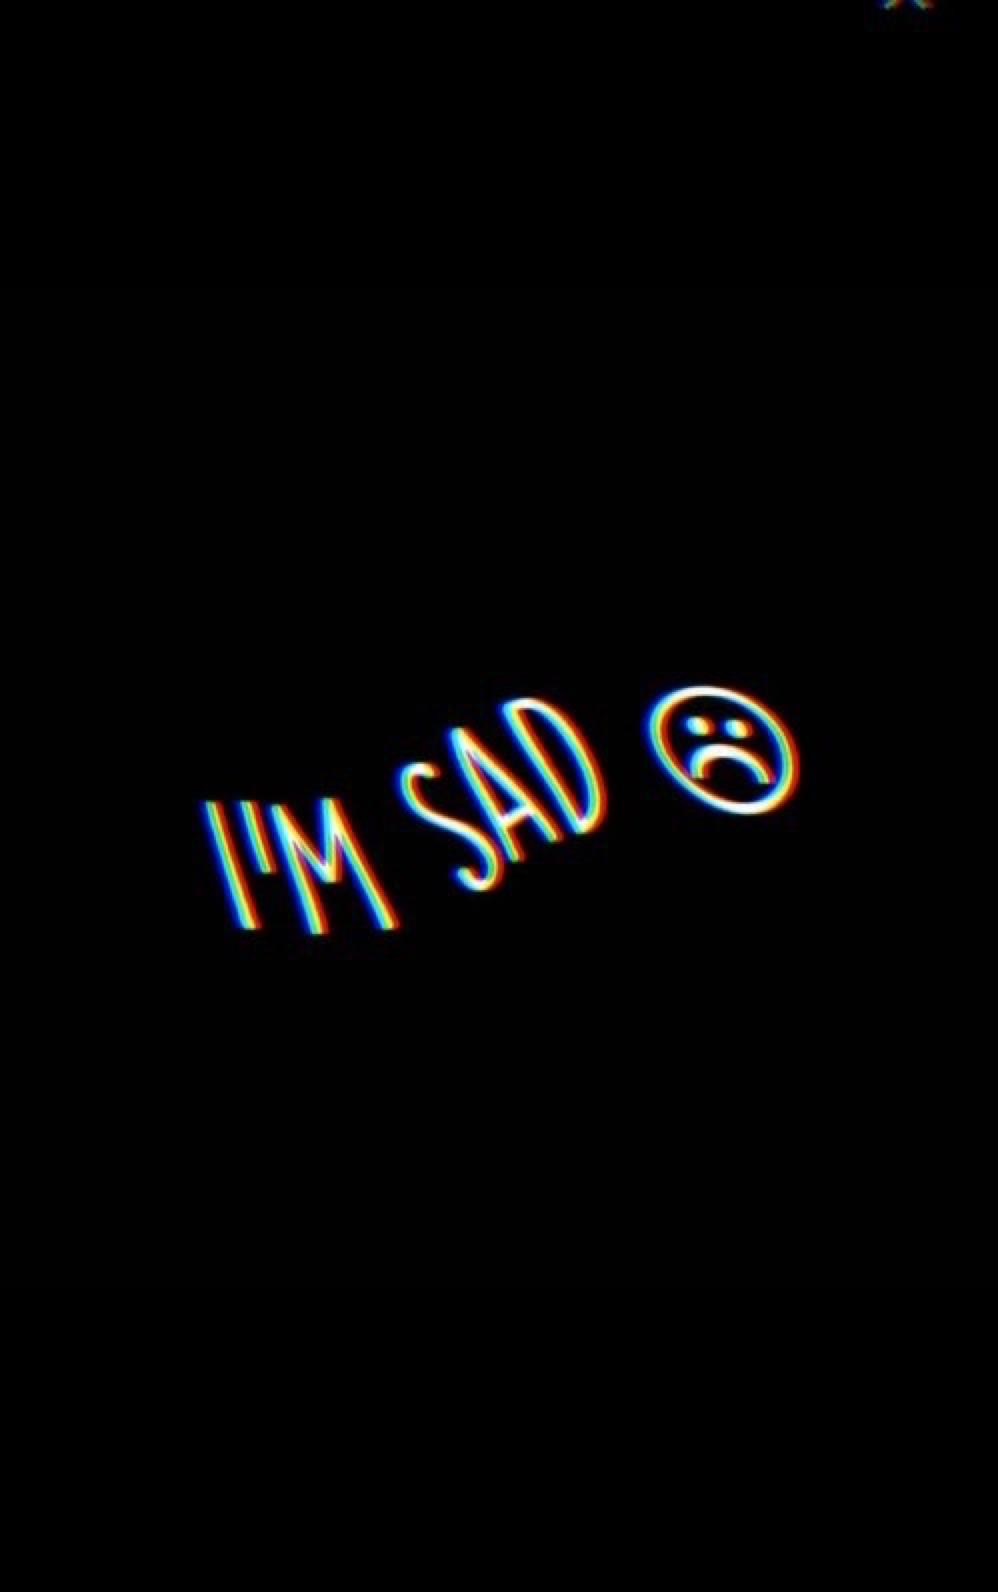 The text ``i'm sad'' is written in neon blue - Sad, depressing